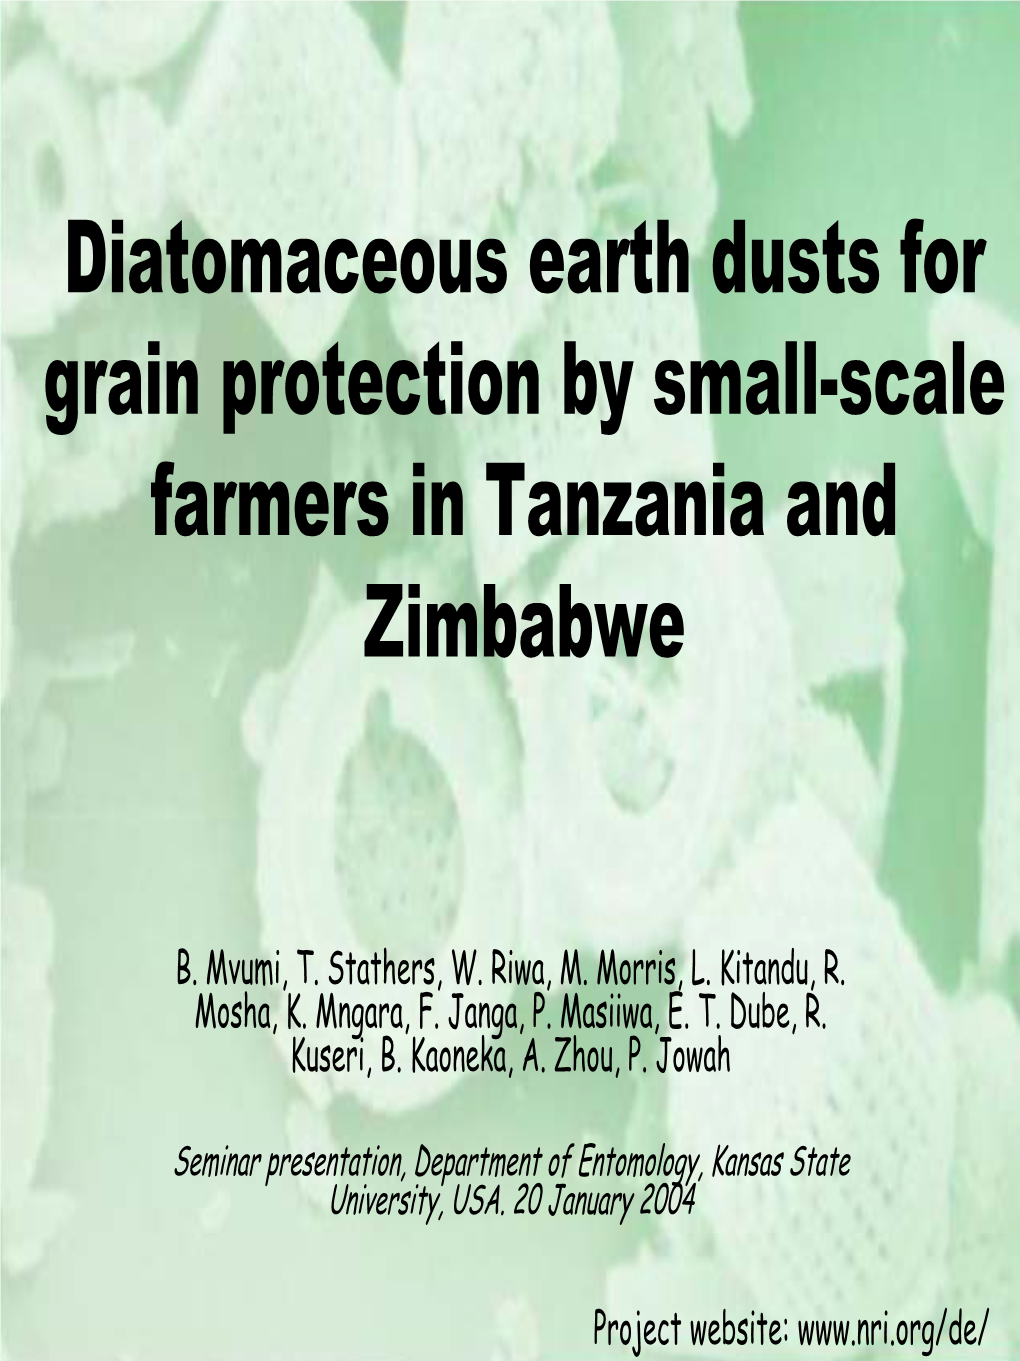 Diatomaceous Earth Dusts for Grain Protection by Small-Scale Farmers in Tanzania and Zimbabwe